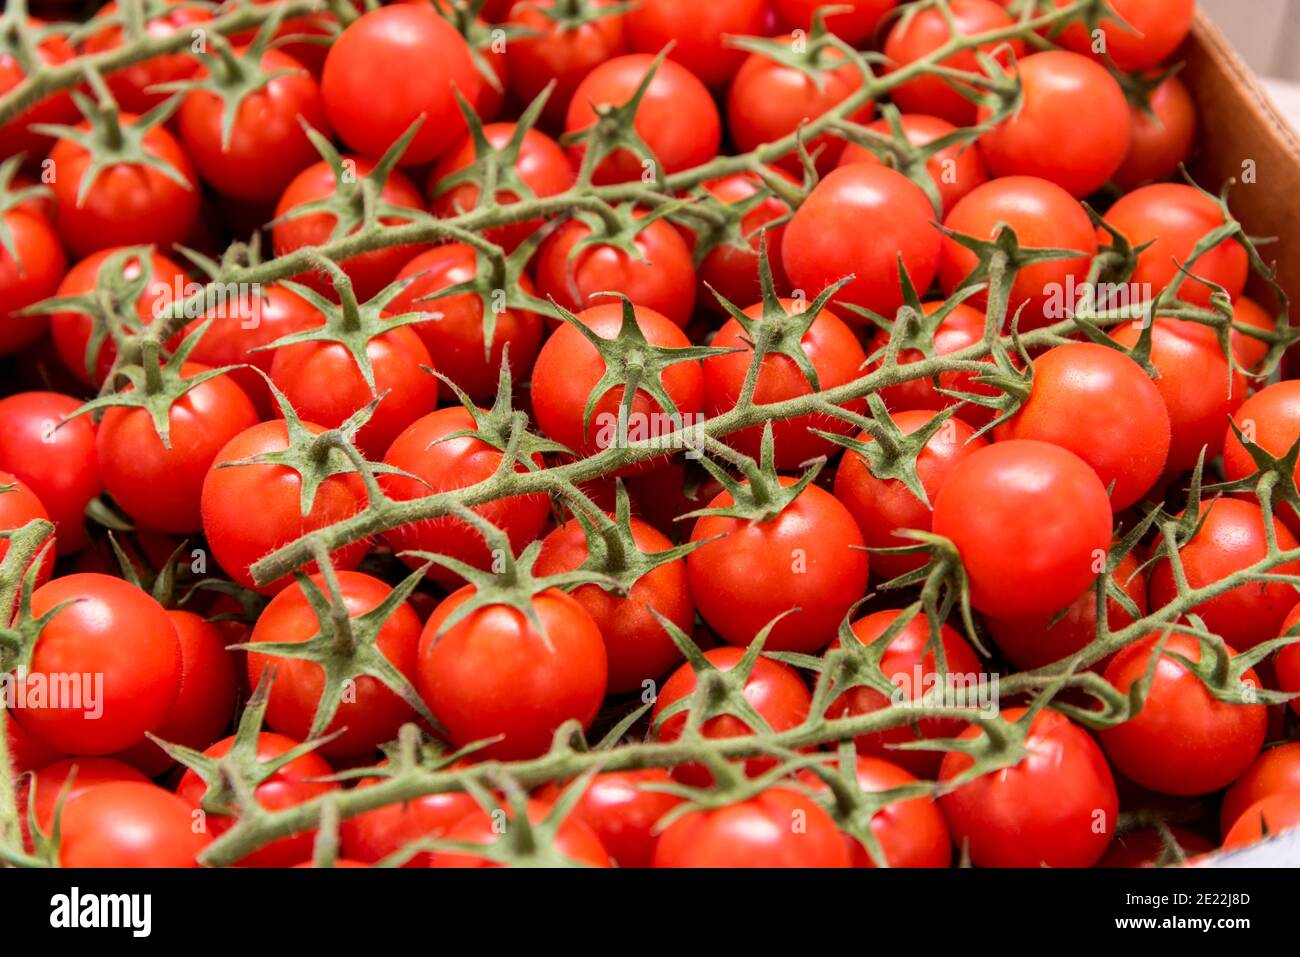 Cherry tomatoes from Pachino, Sicily, Italy, on the greengrocer's counter Stock Photo